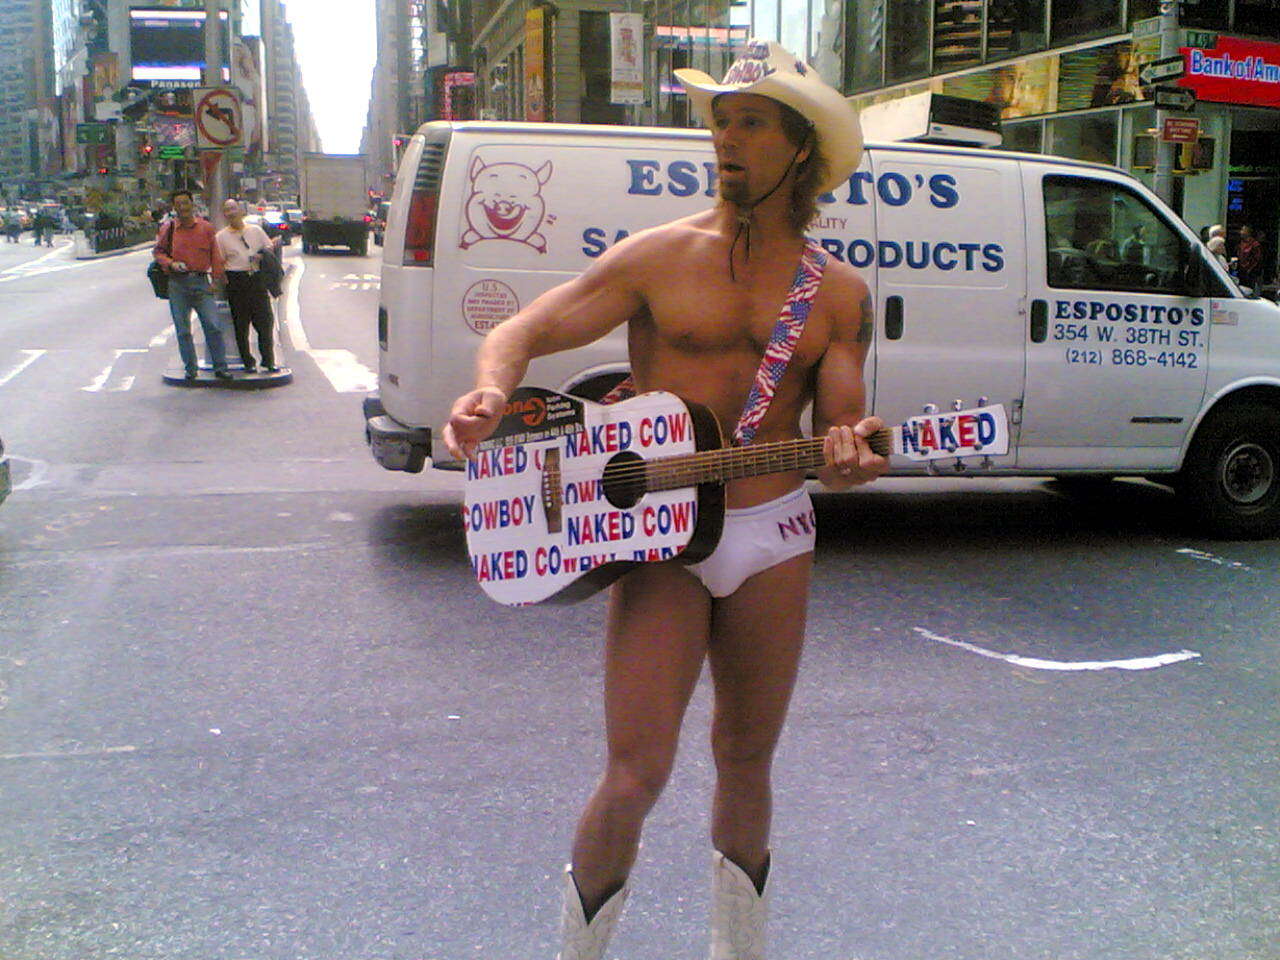 The not entirely Naked cowboy